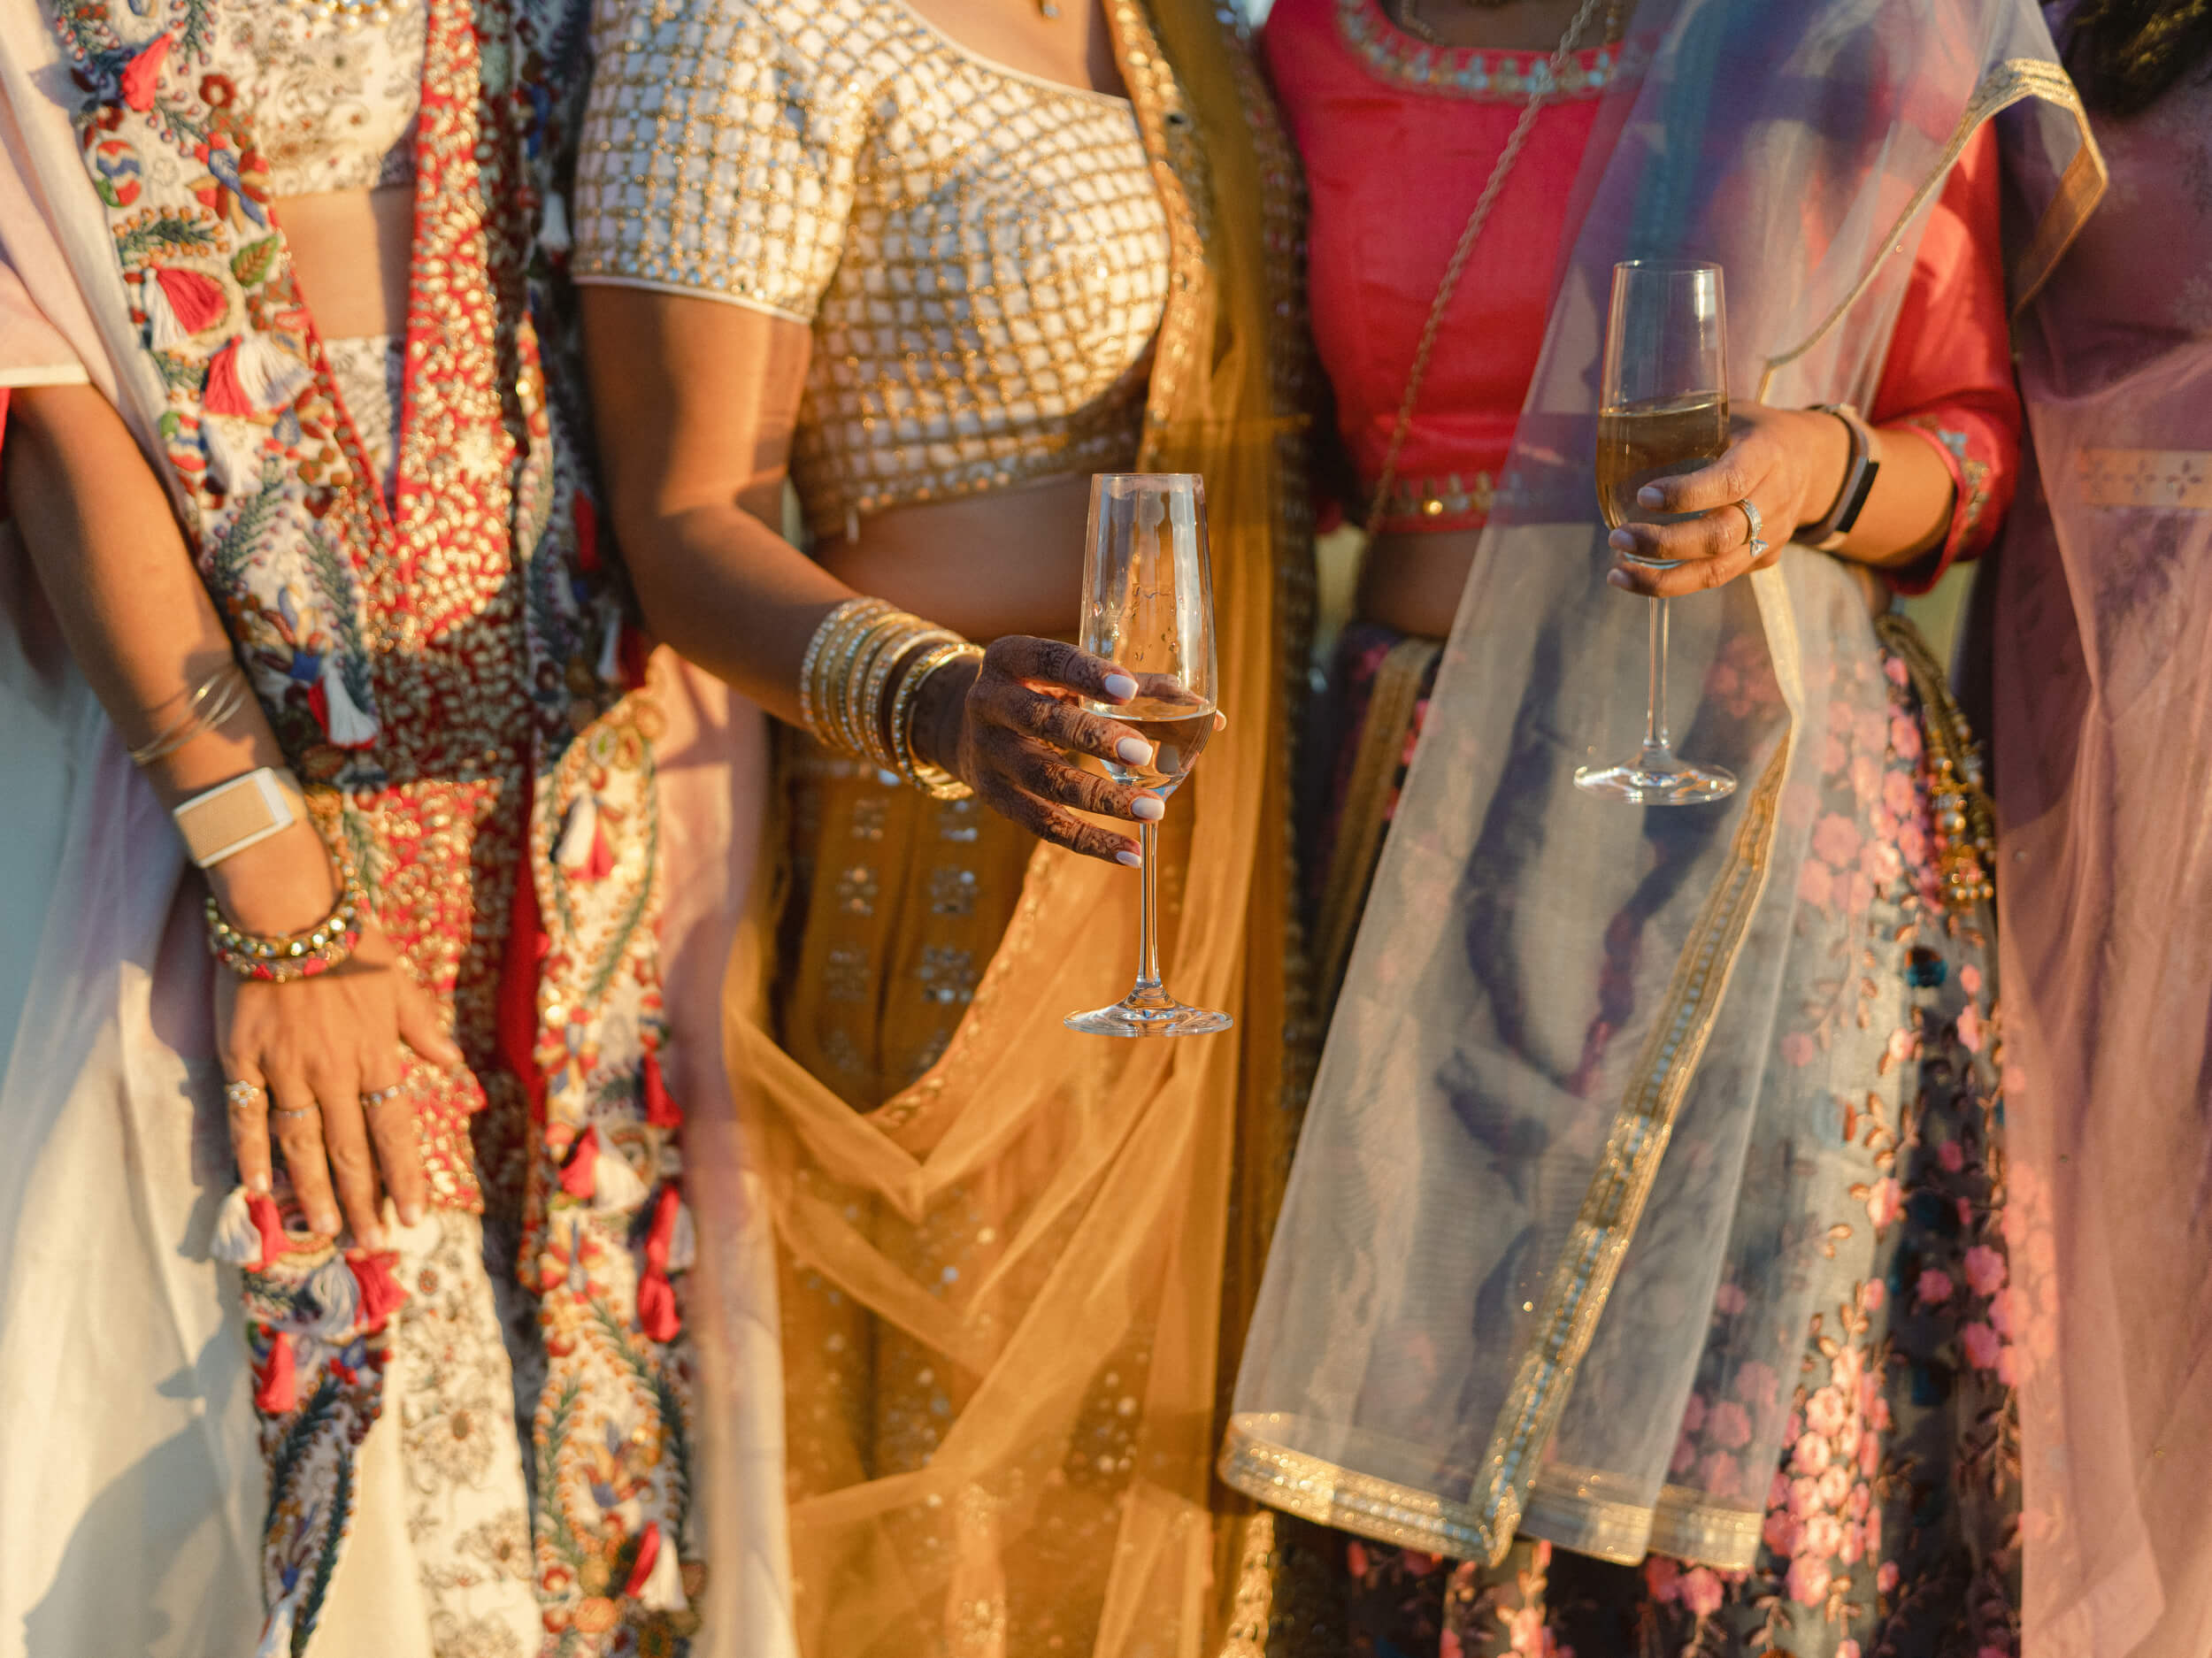 Women in saris holding champagne